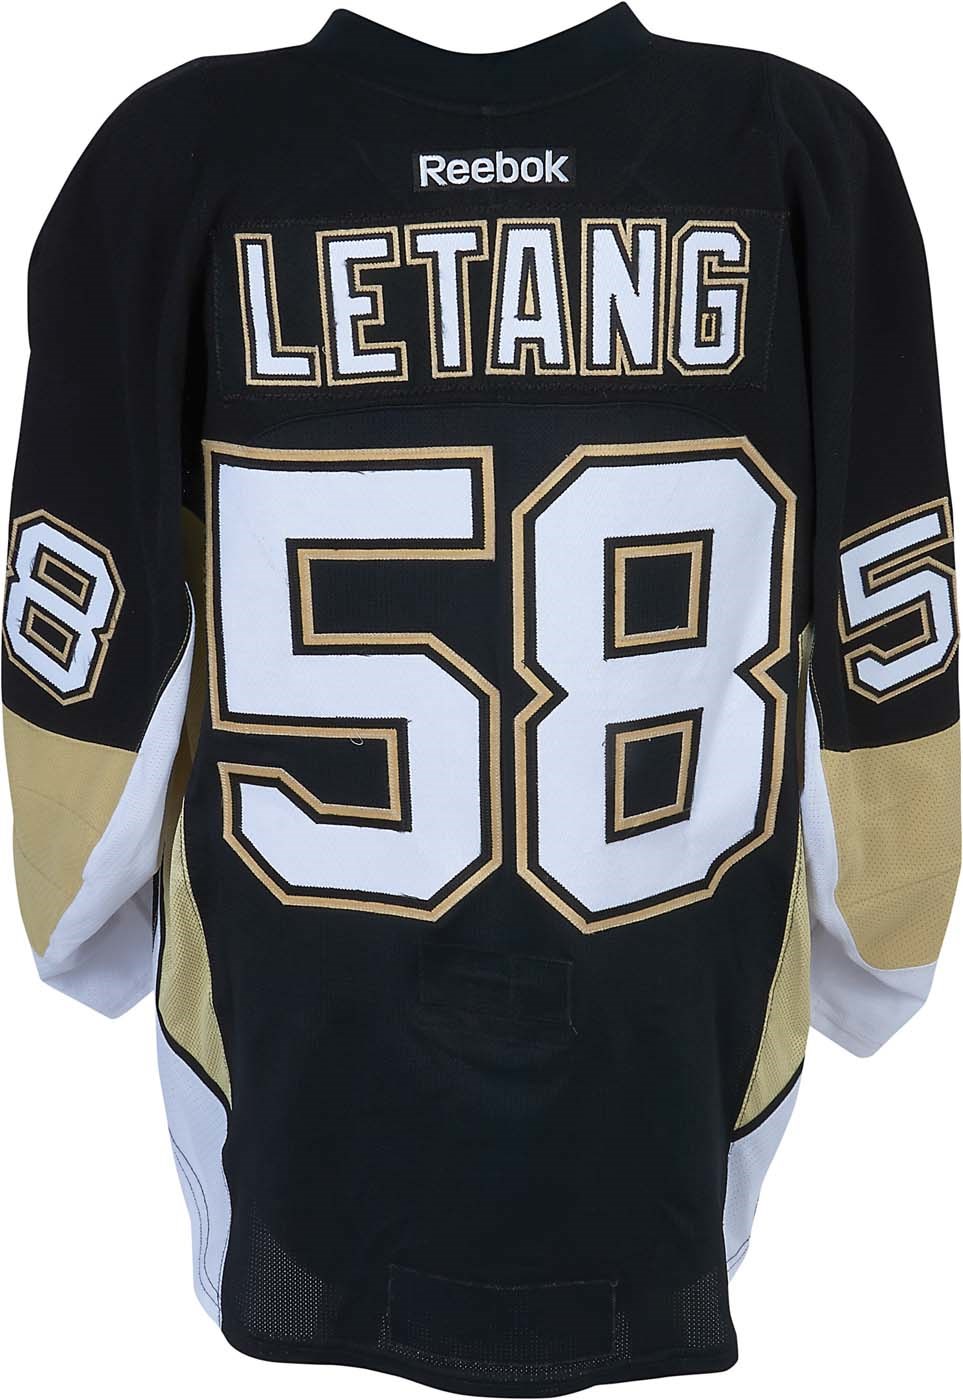 - 2015-16 Kris Letang Game Worn Pittsburgh Penguins Jersey - Worn in 14 Games (Penguins LOA & Photo-Matched)